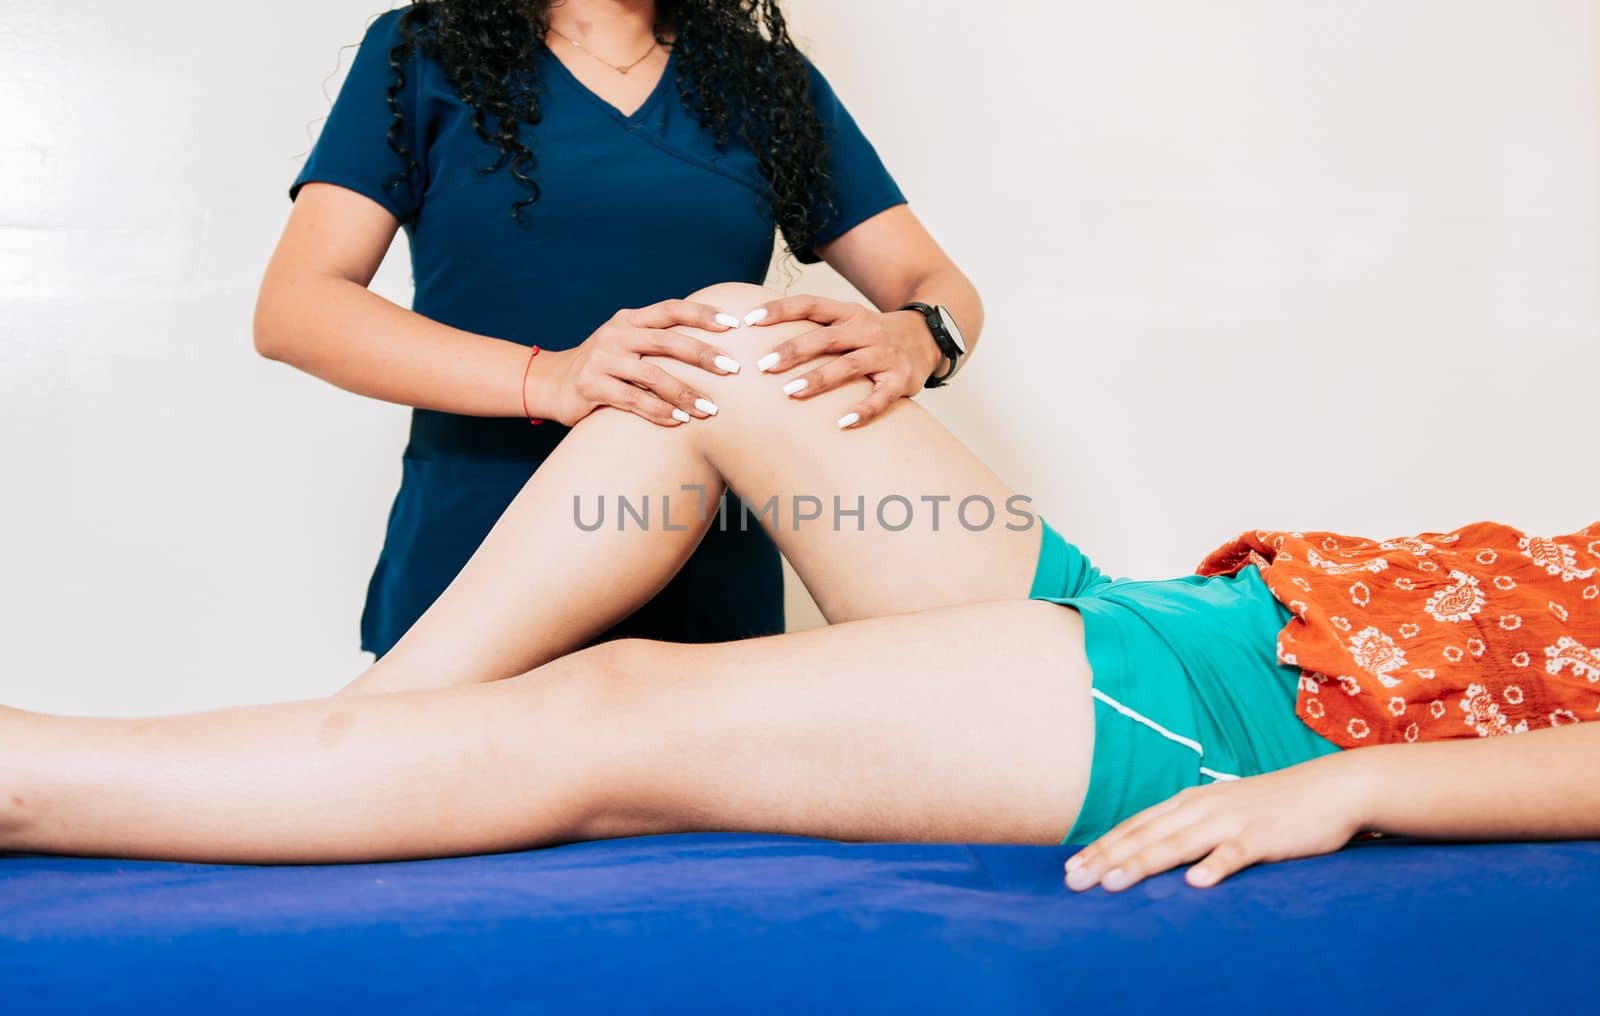 Knee rehabilitation physiotherapy to patient lying down. Female physiotherapist checking knee to female patient. Physiotherapist hands checking knee of female patient by isaiphoto